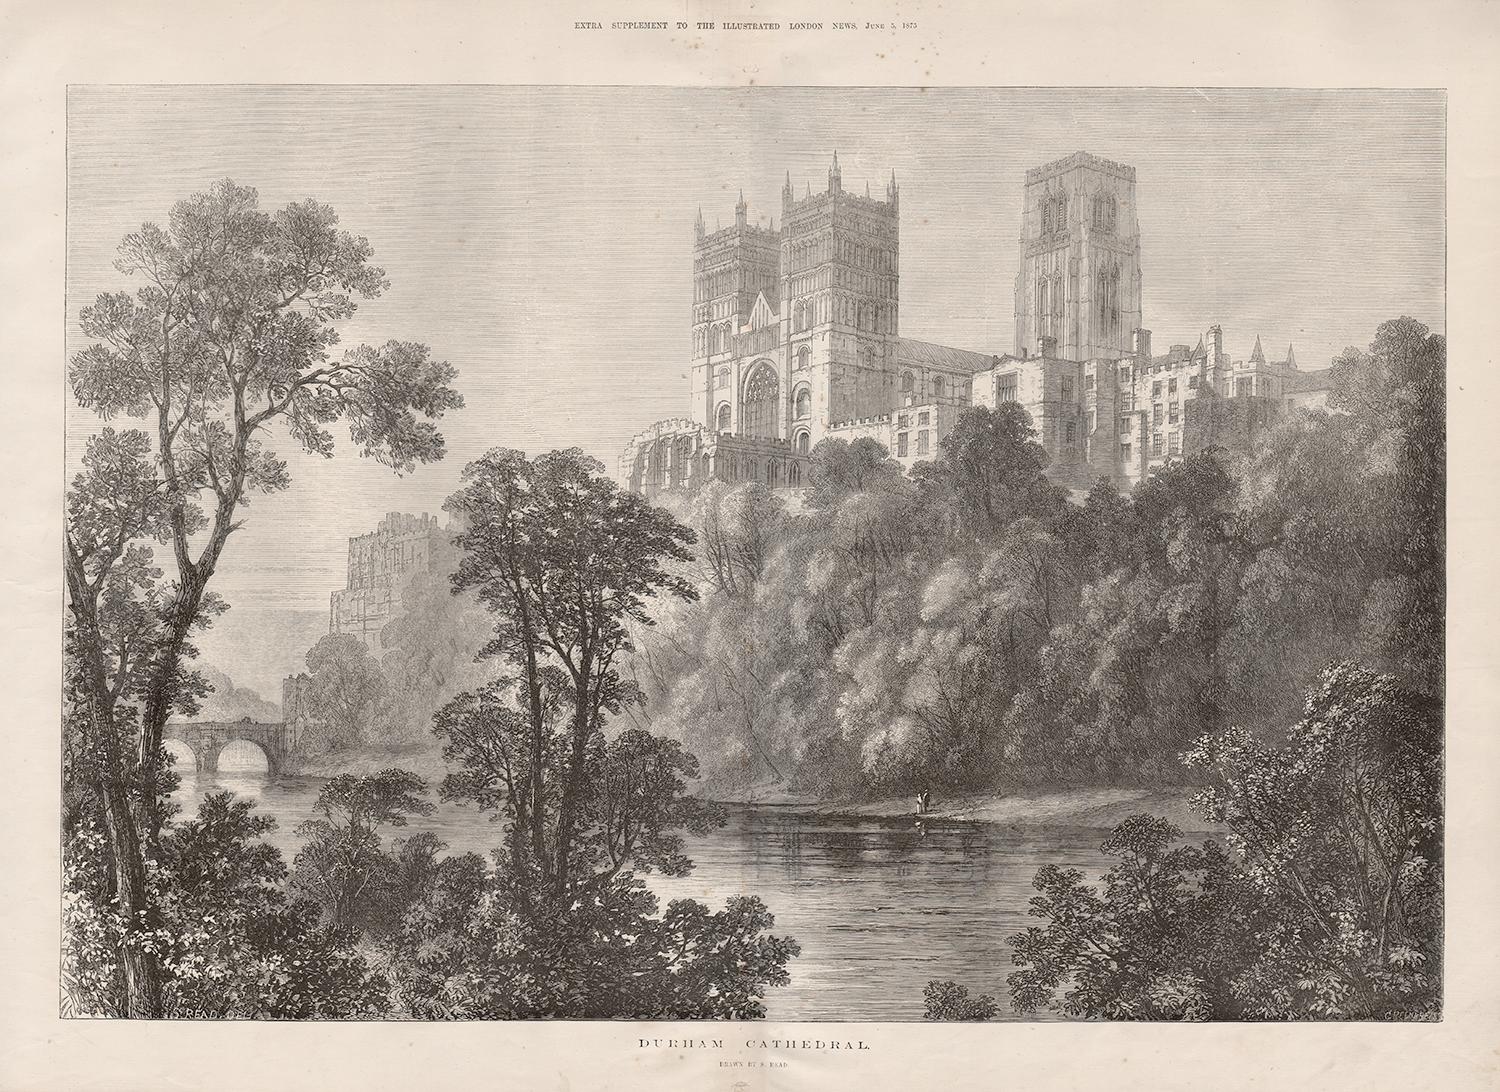 Durham Cathedral, C19th English topographical engraving, by Samuel Read, 1873